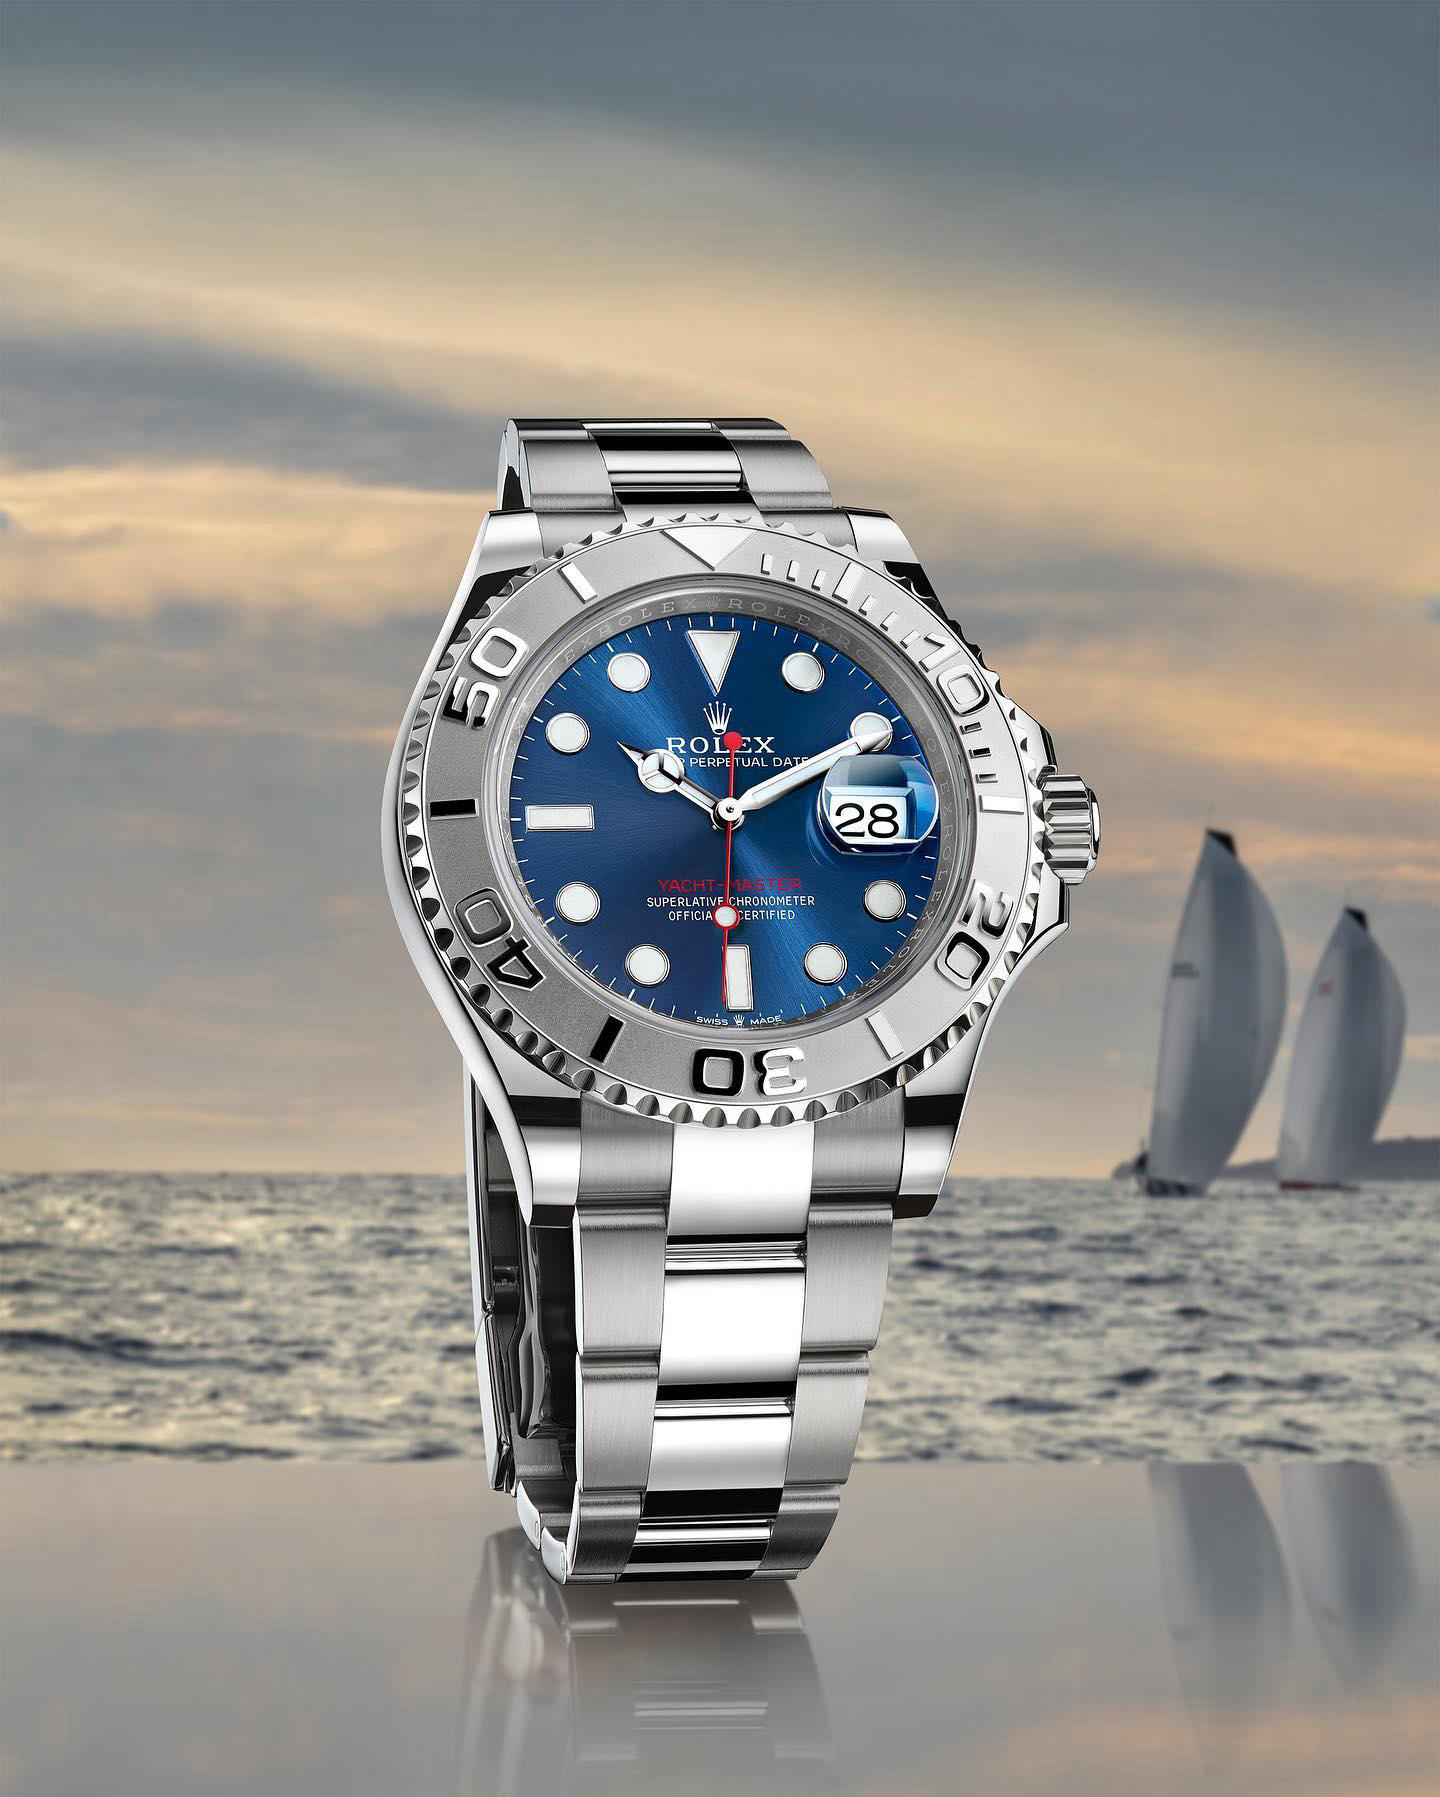 ROLEX - The Yacht-Master 40 in a Rolesium version features a rotatable bezel crafted in platinum, an